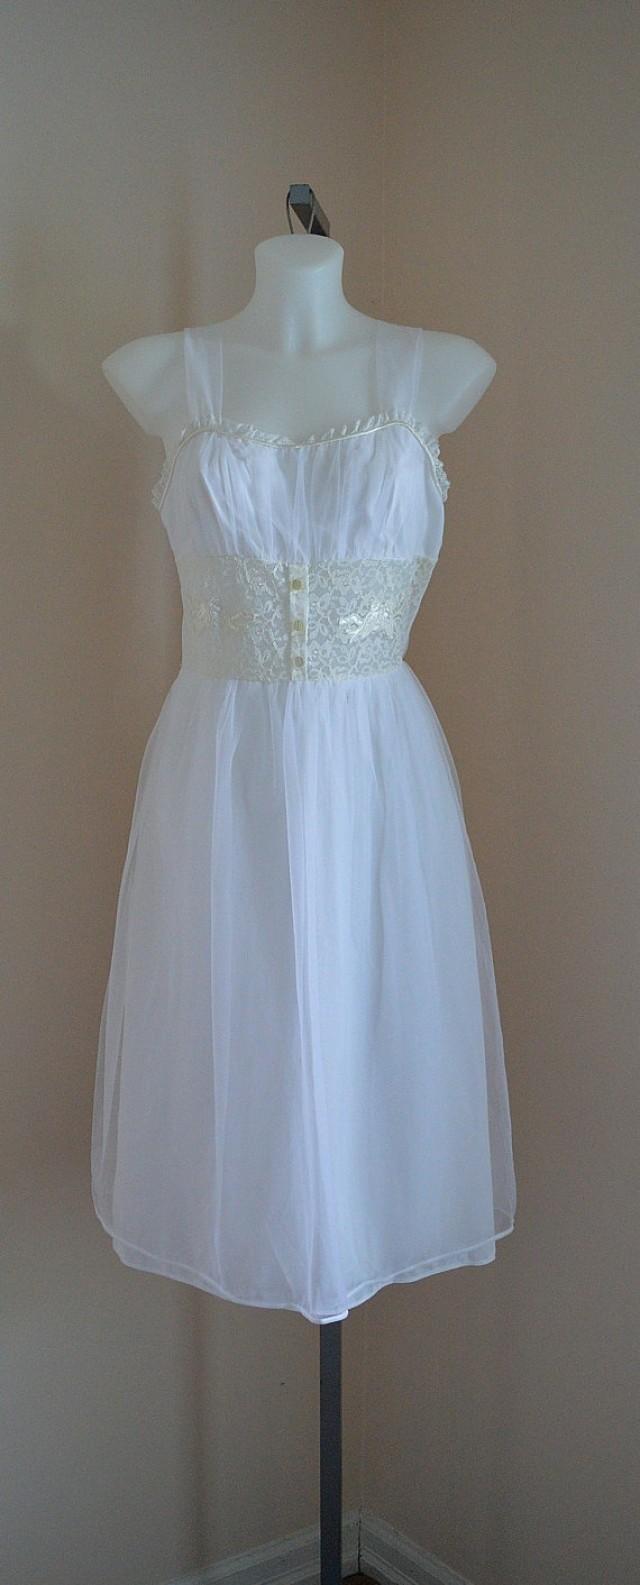 Vintage 1950s White Chiffon Nightgown, Beauty Form, 1950s Nightgown ...